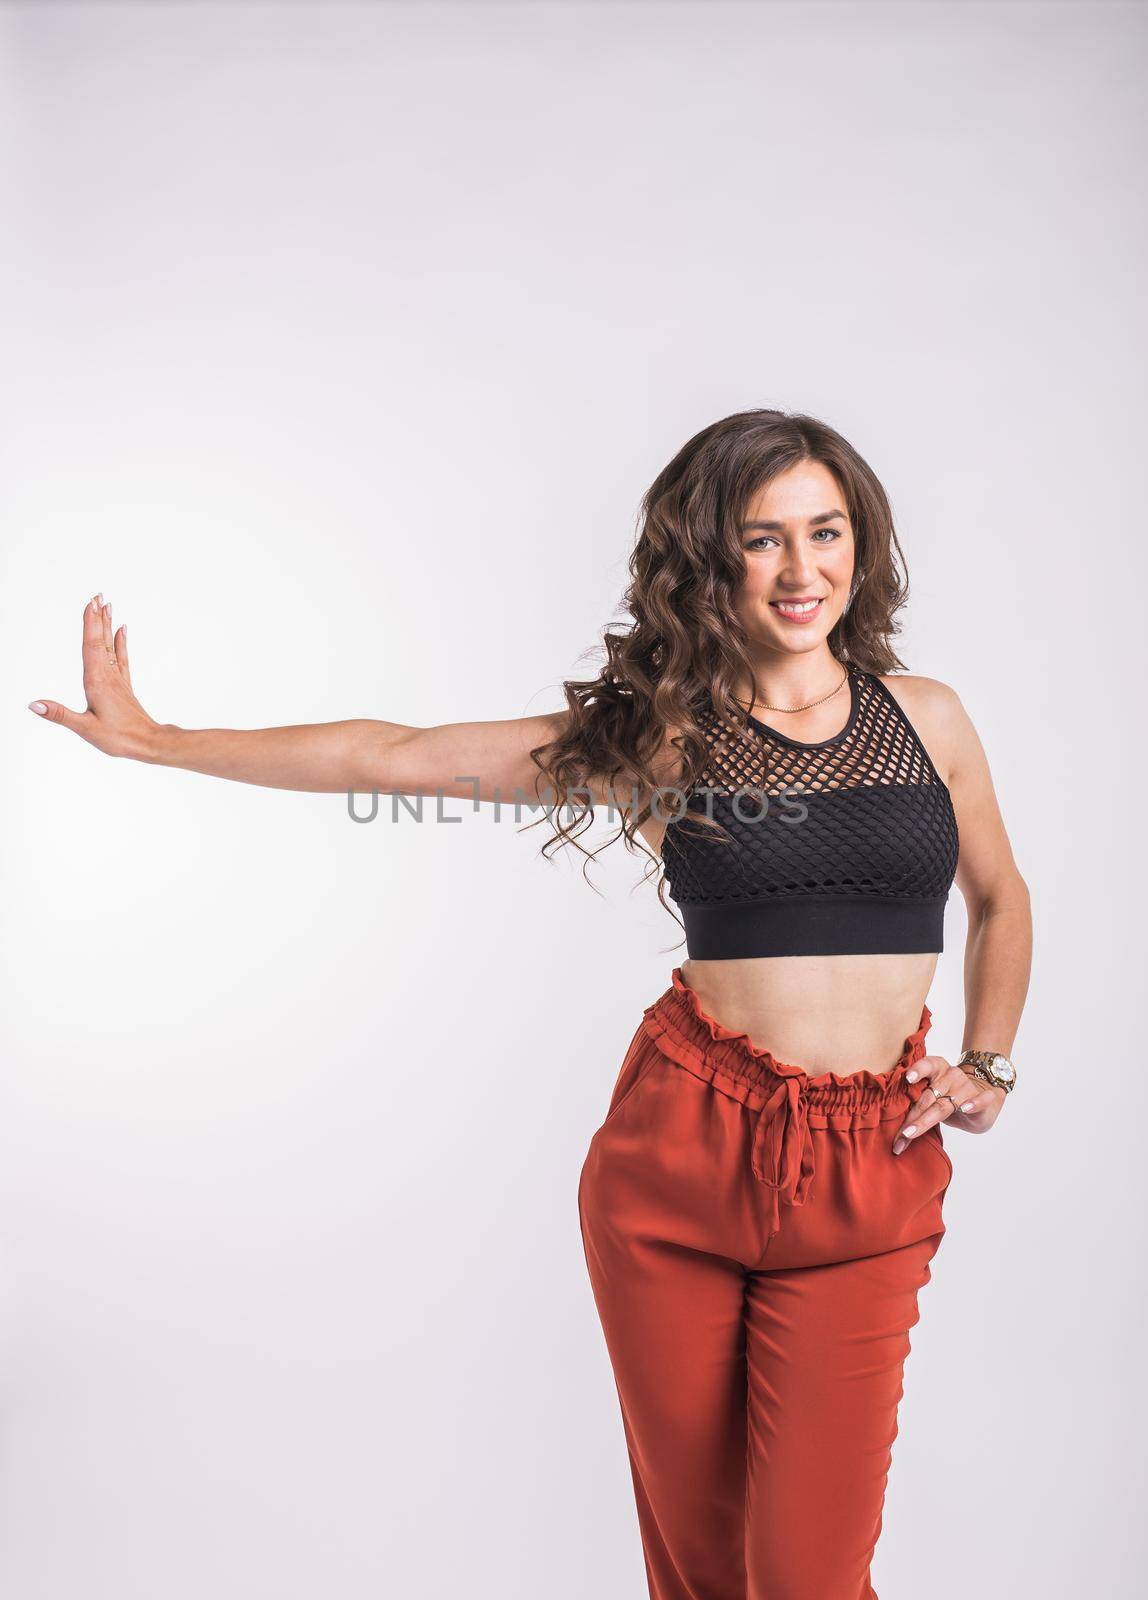 Latina dance, strip dance, contemporary and bachata lady concept - Woman dancing improvisation and moving her long hair on a white background